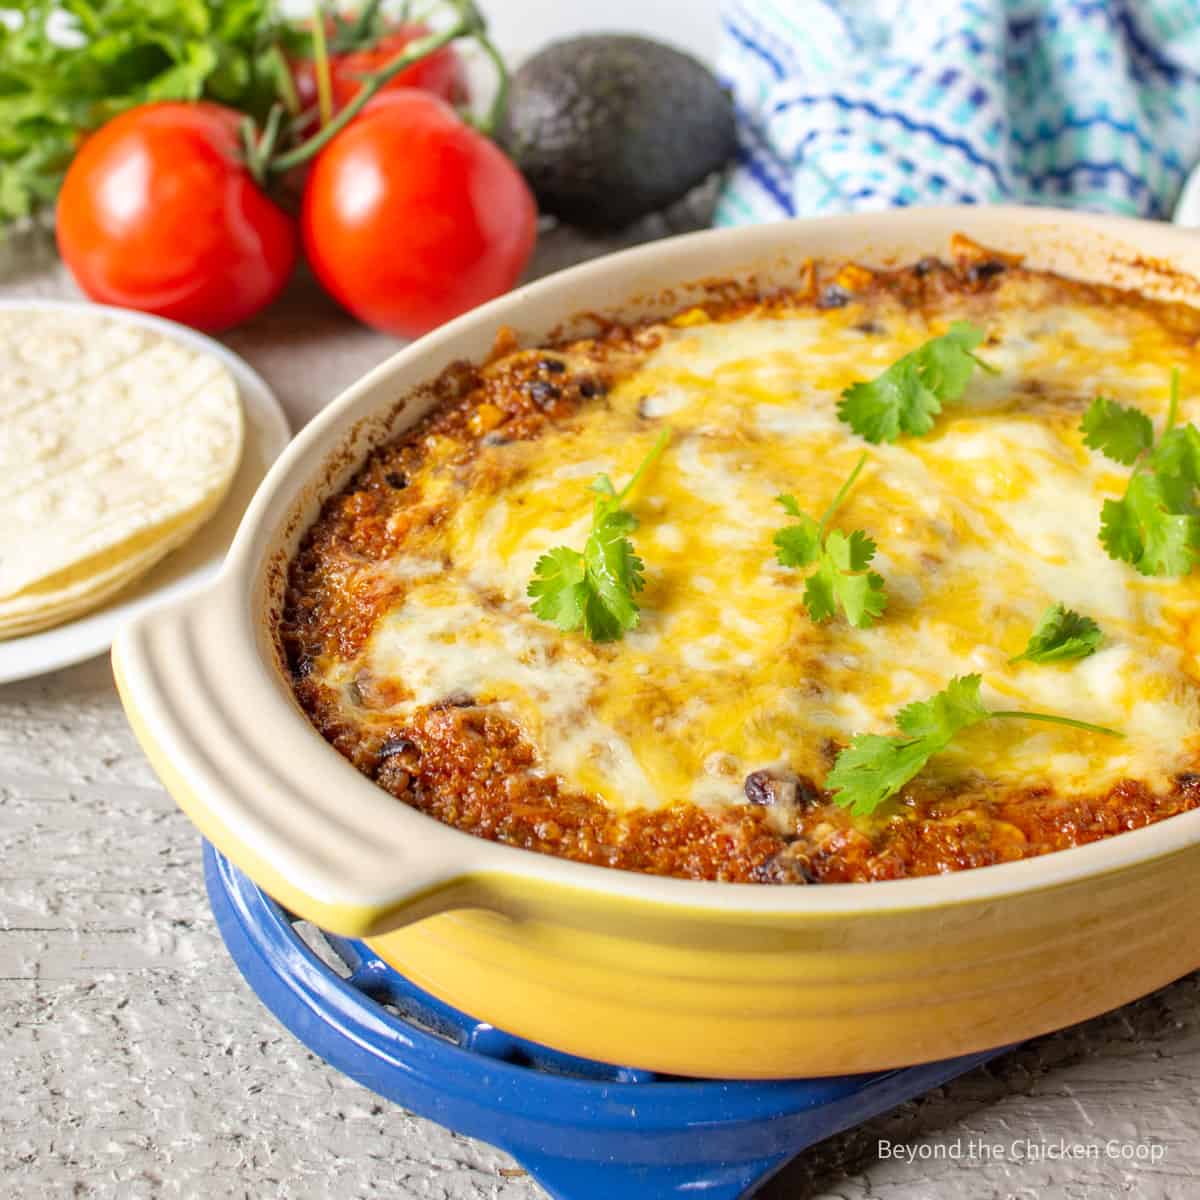 Enchilada bake topped with melted cheese and cilantro.